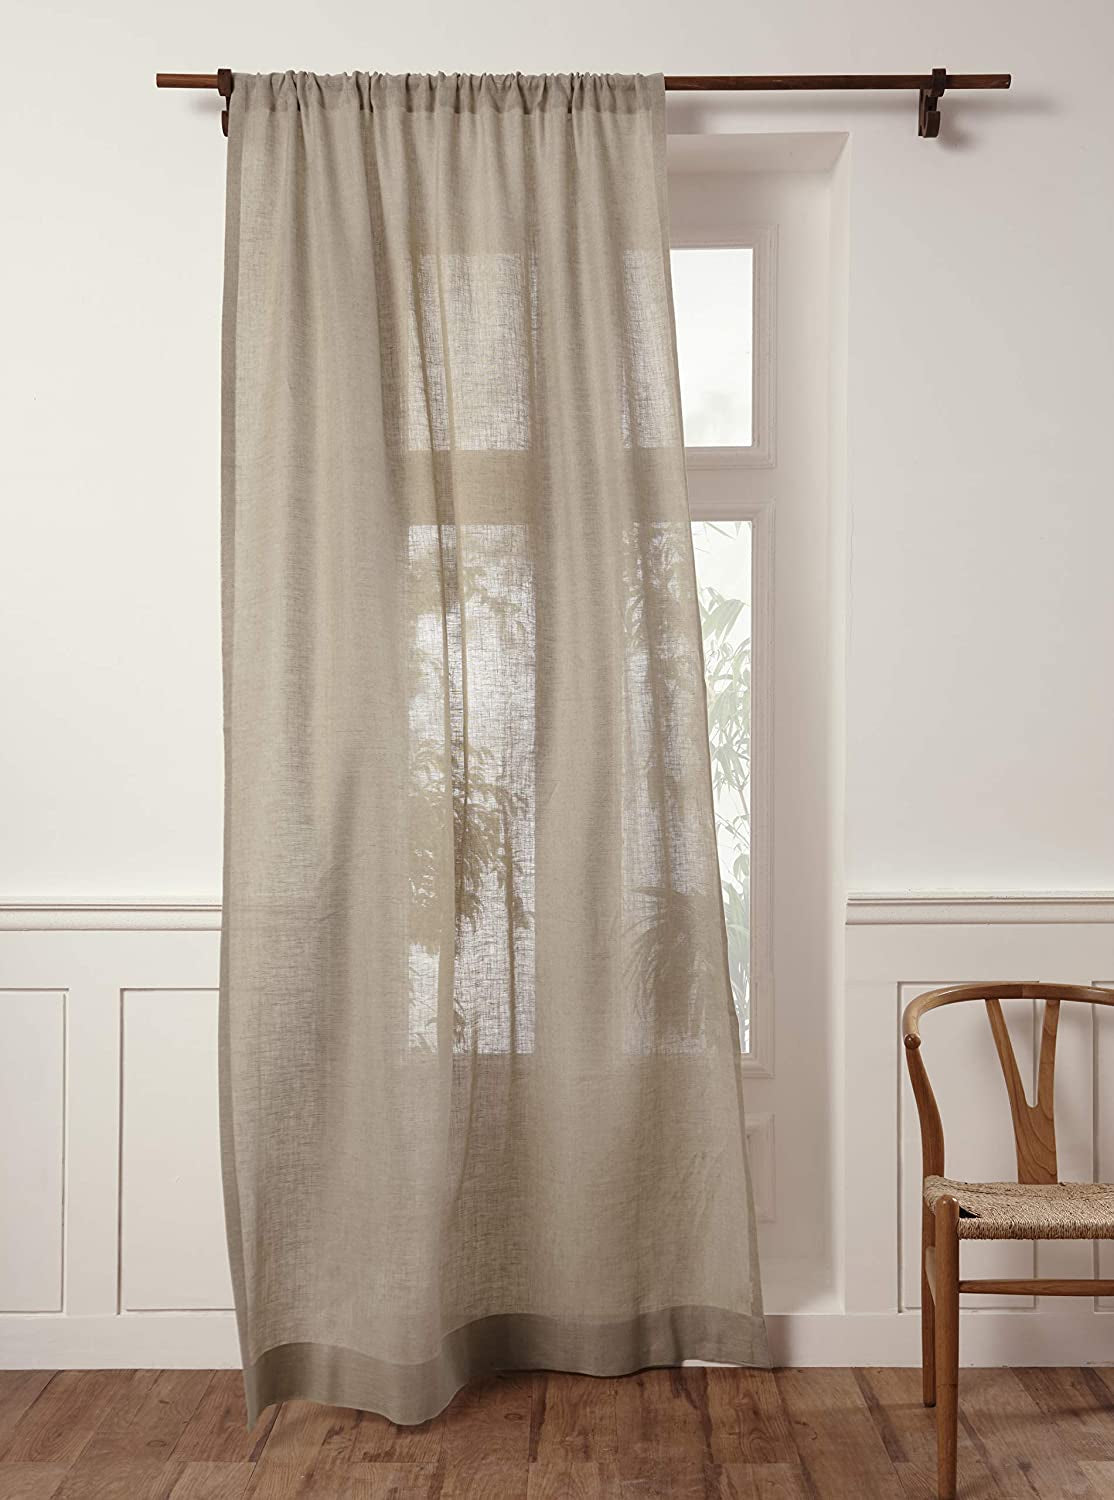 Solino Home Linen Sheer Curtain – 52 X 45 Inch Light Natural Rod Pocket Window Panel – 100% Pure Natural Fabric Curtain for Living Room, Indoor, Outdoor – Handcrafted from European Flax  Solino Home Natural 52 X 63 Inch 